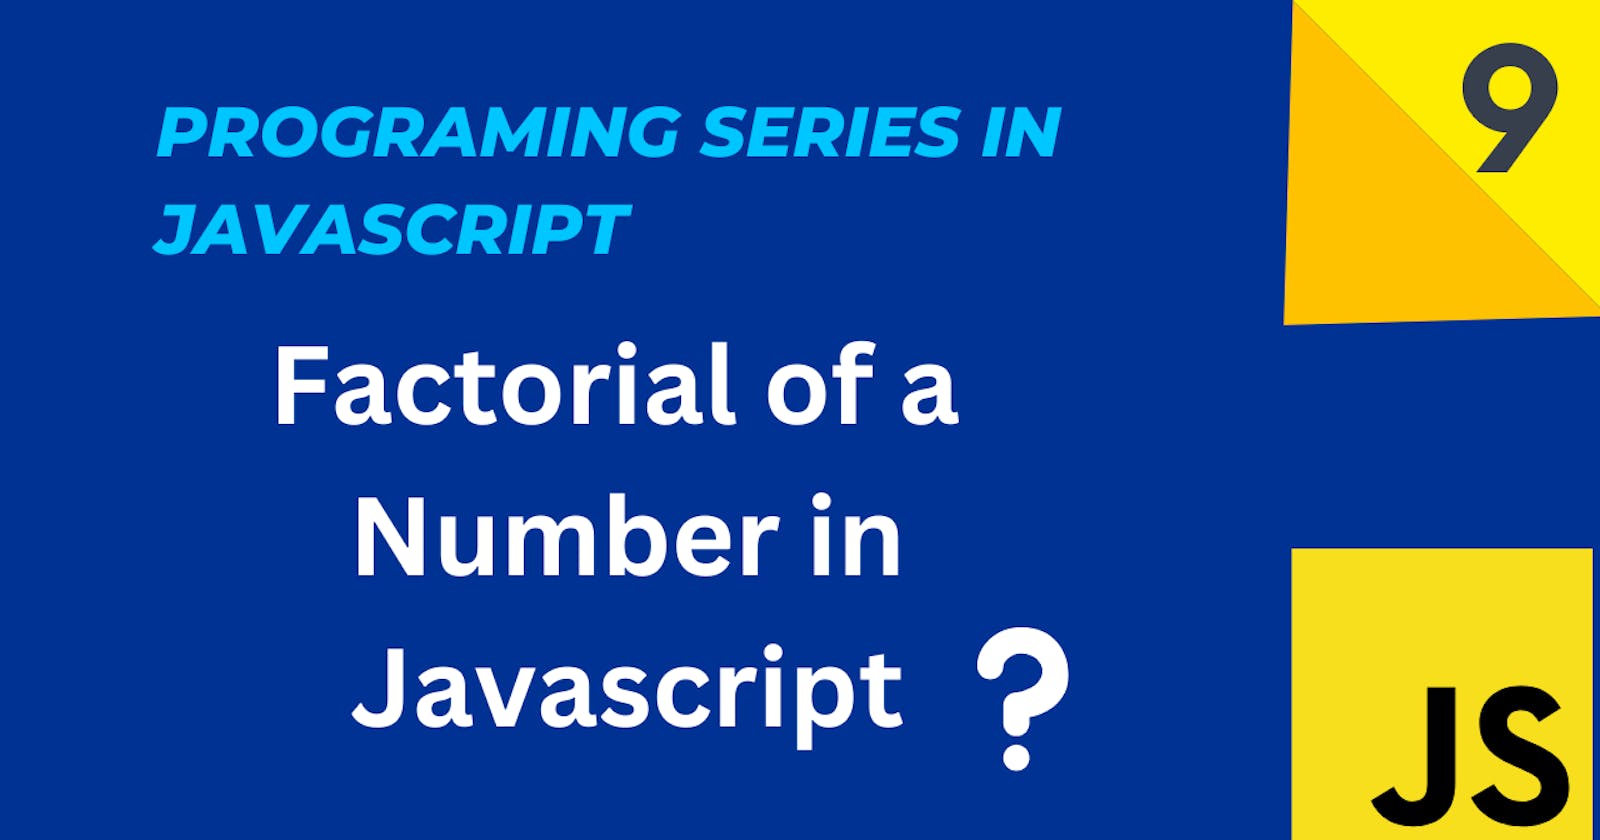 Factorial of a Number in Javascript